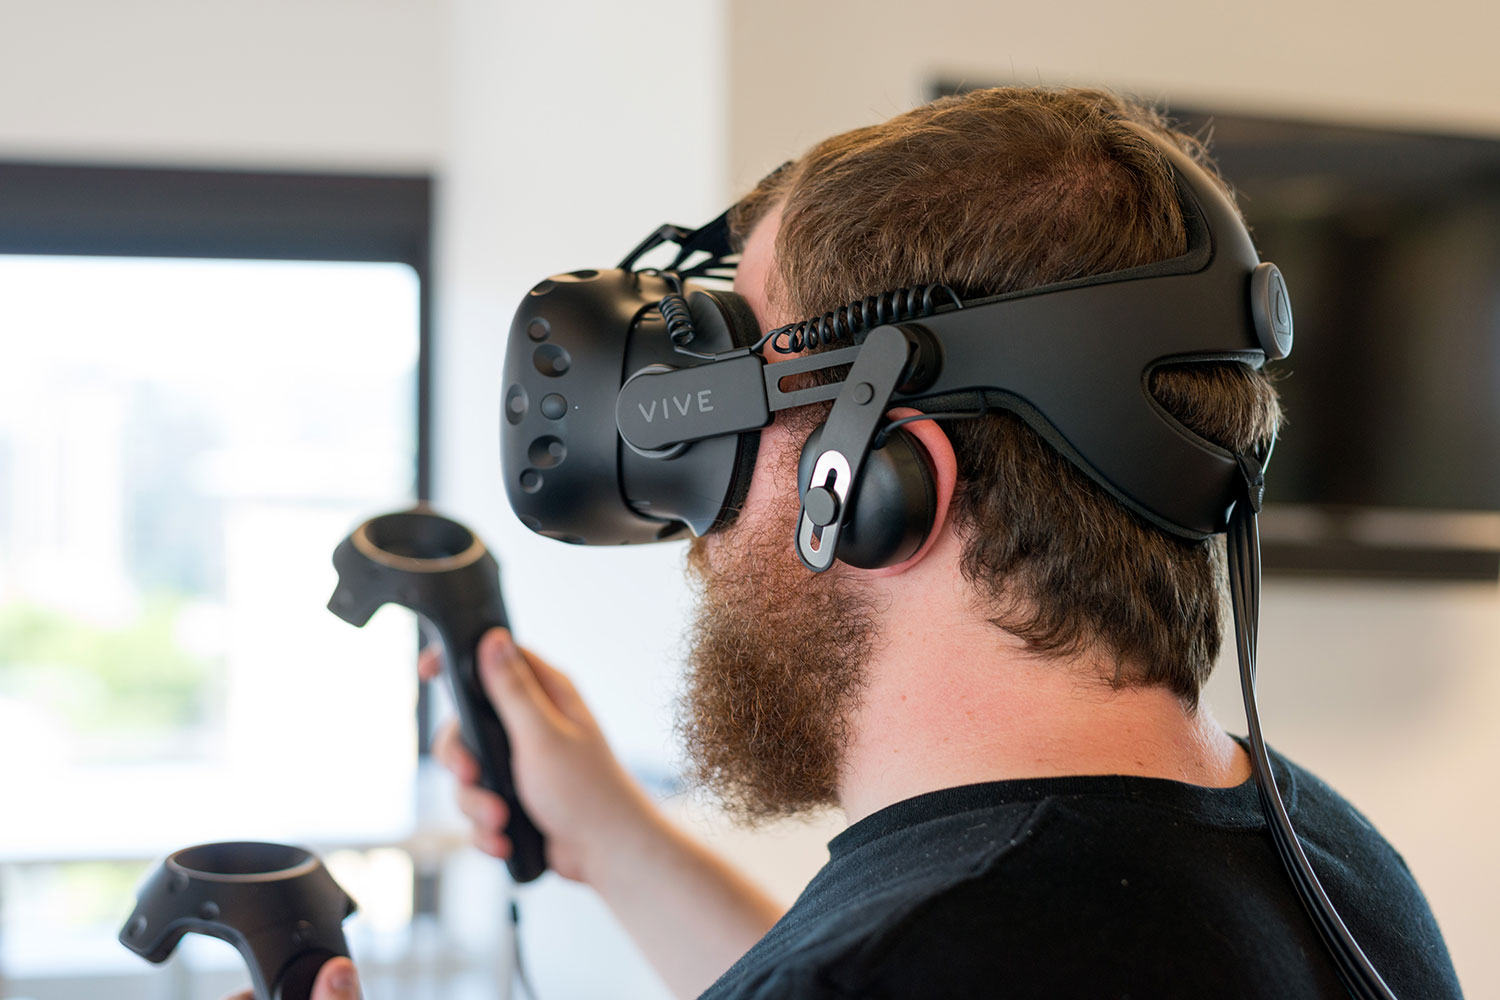 Oculus Rift vs. HTC Vive: Which VR headset should you buy? - CNET